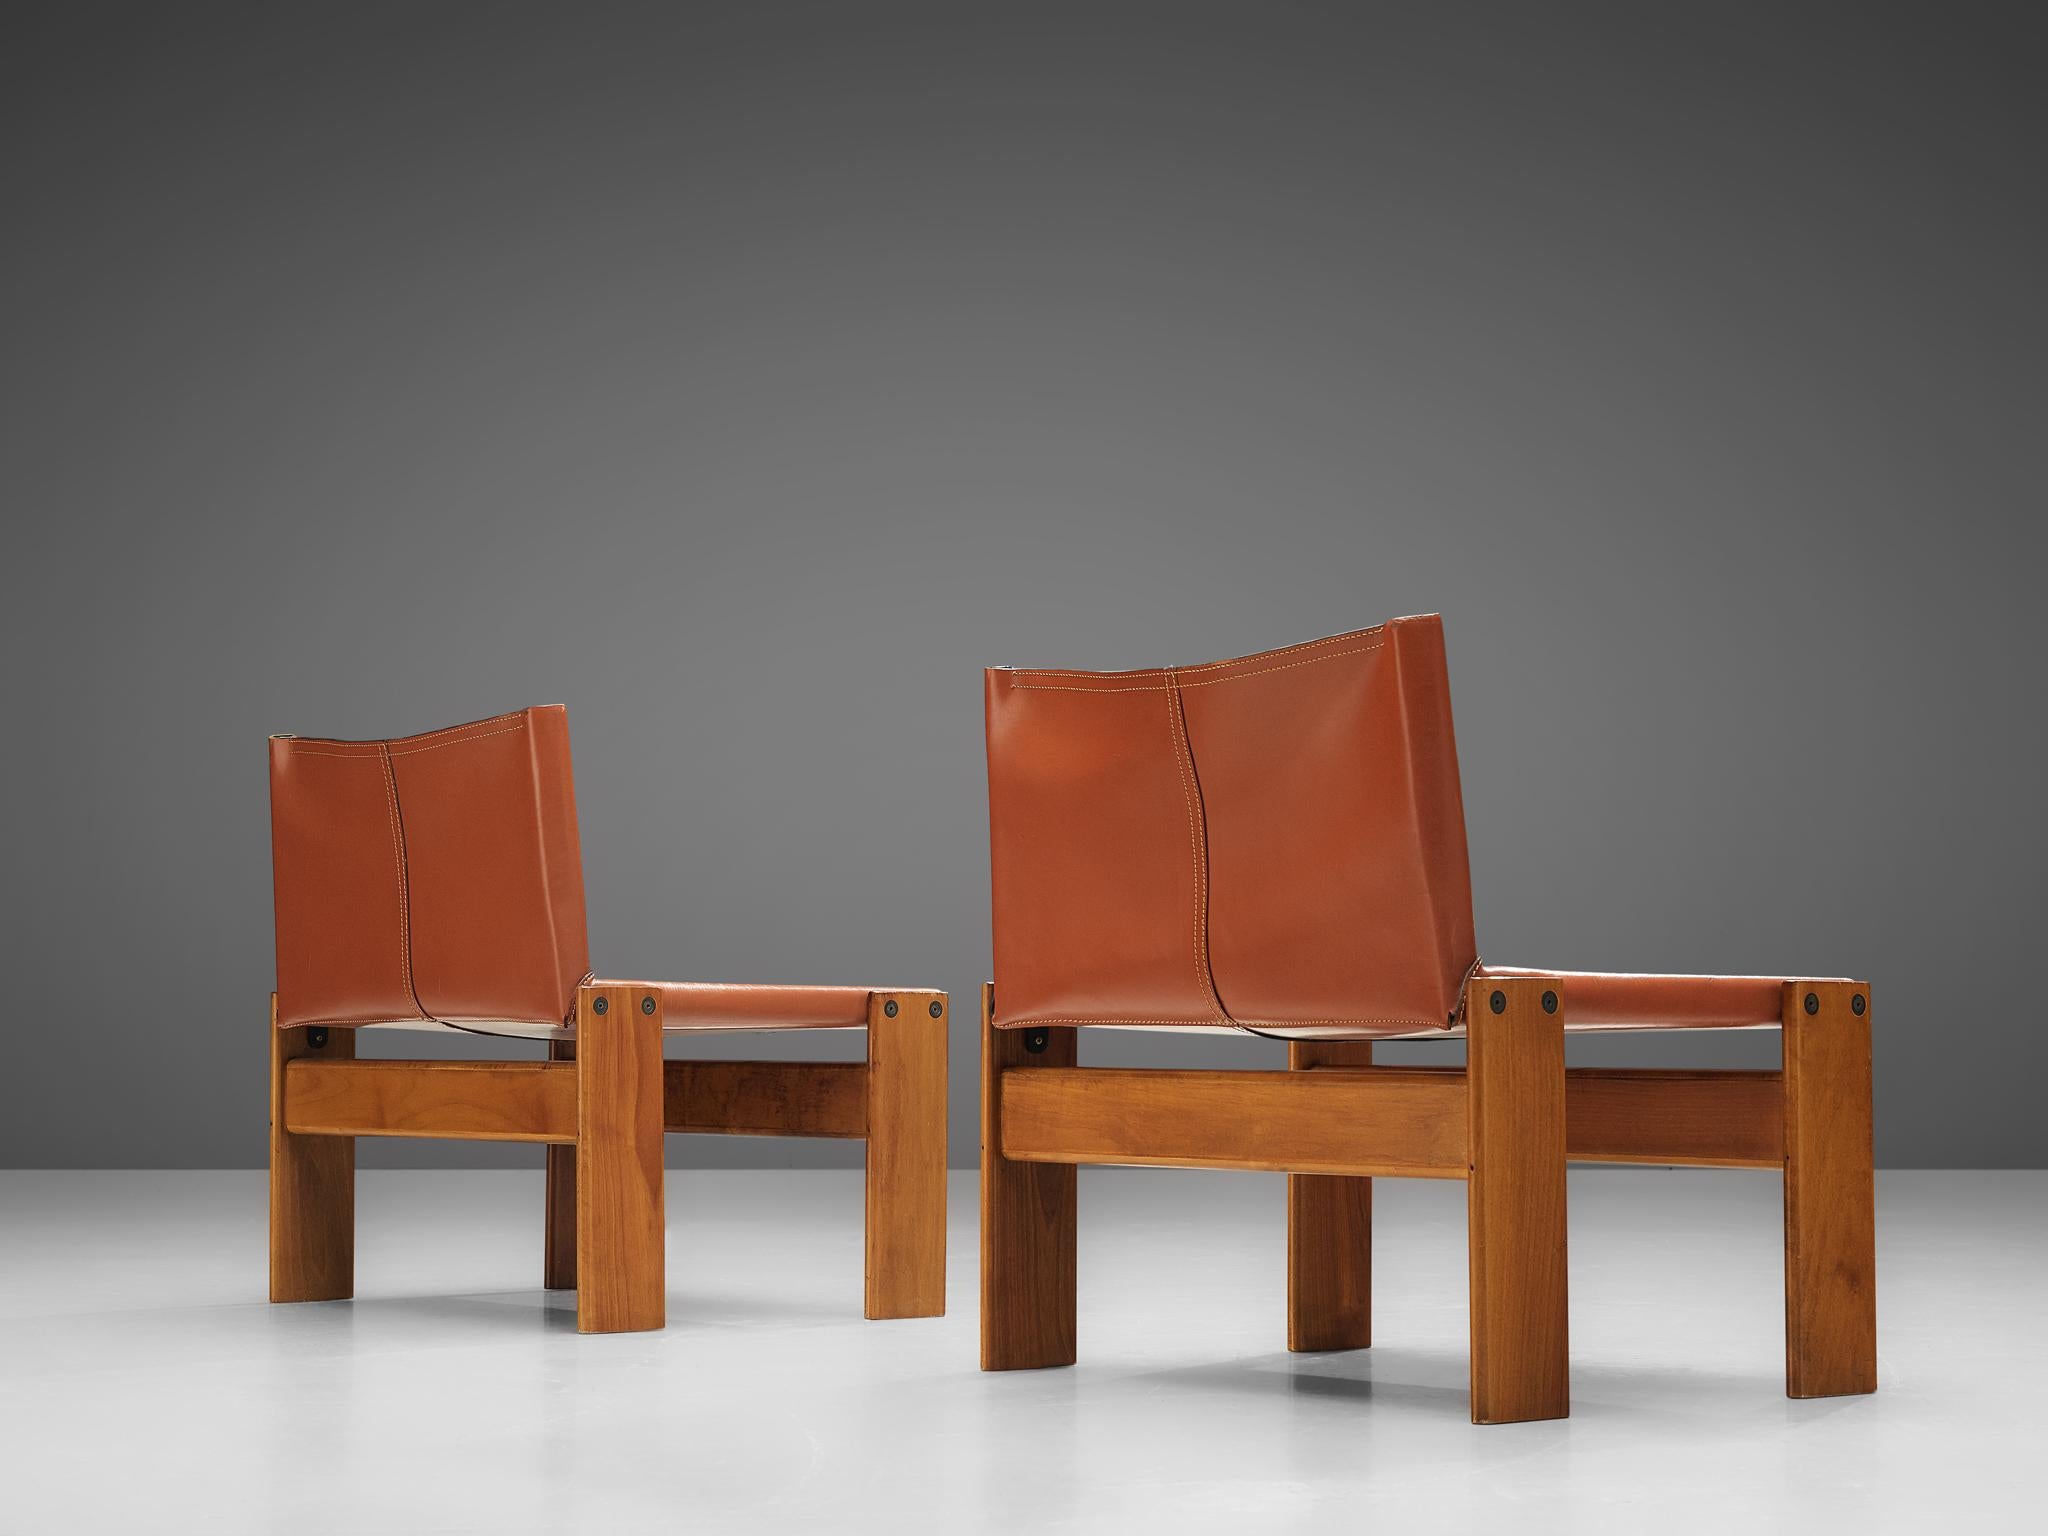 Afra & Tobia Scarpa for Molteni, pair of 'monk' lounge chairs, beech and cognac leather, Italy, 1970s

This version of the 'Monk' chair by Afra & Tobia Scarpa is a lower model with a wider seat. The wonderfully cognac leather forms a striking